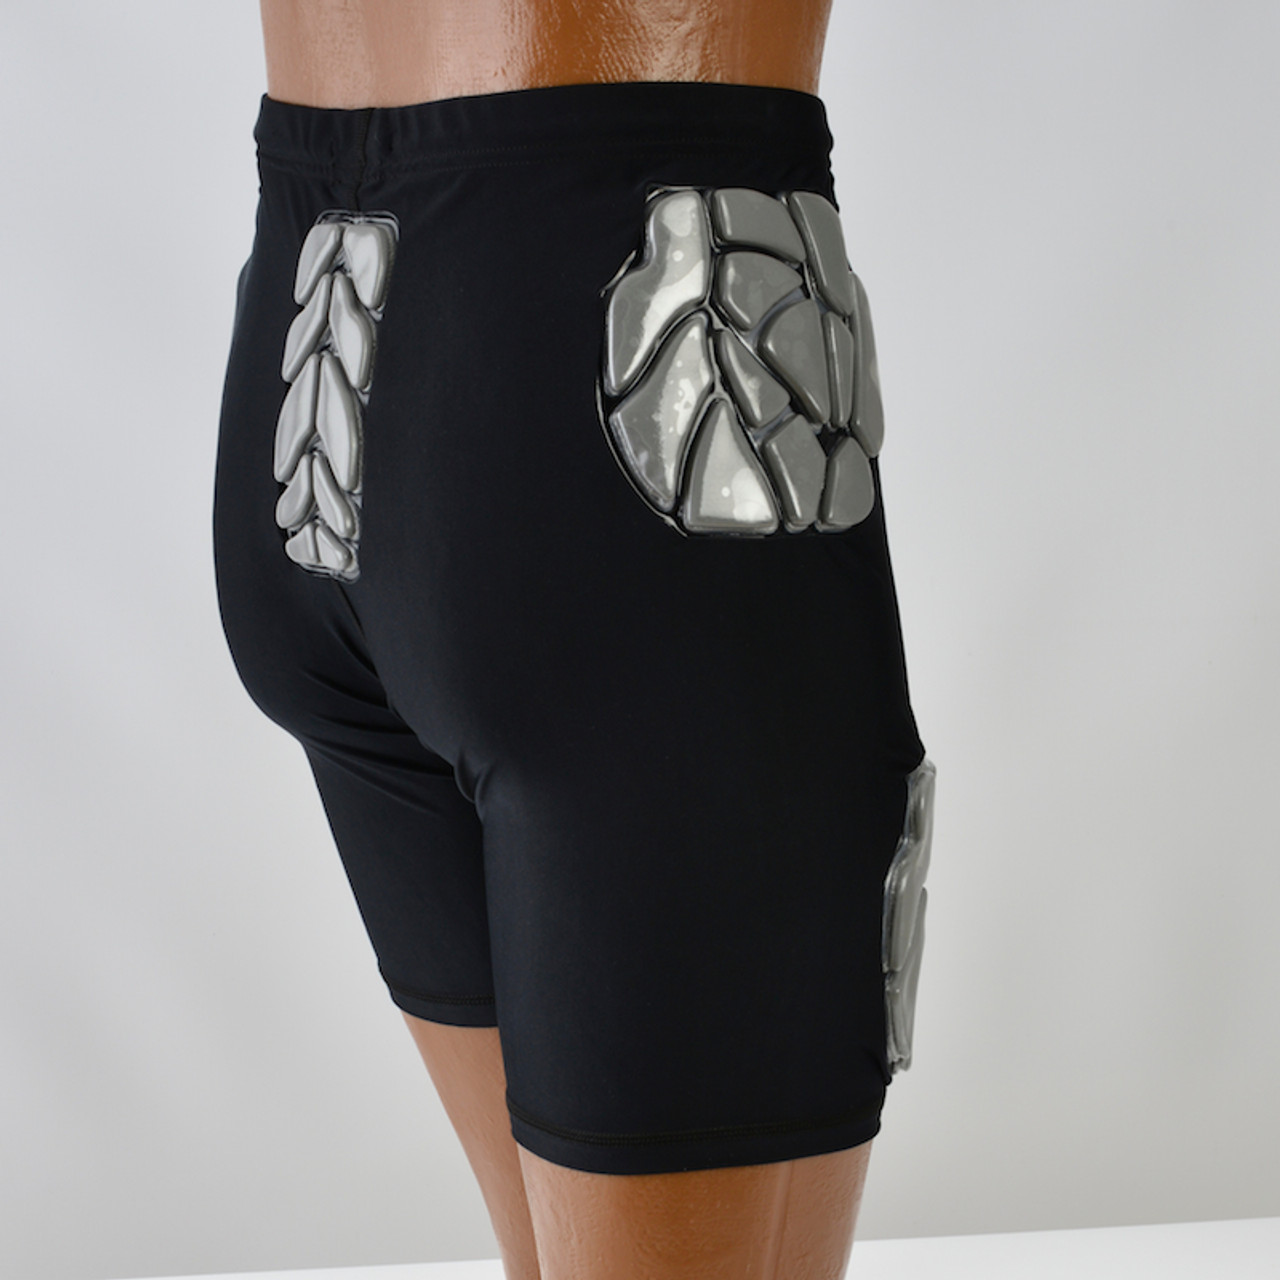 Zoombang Girdle w/ Hip and Tailbone Protection Adult